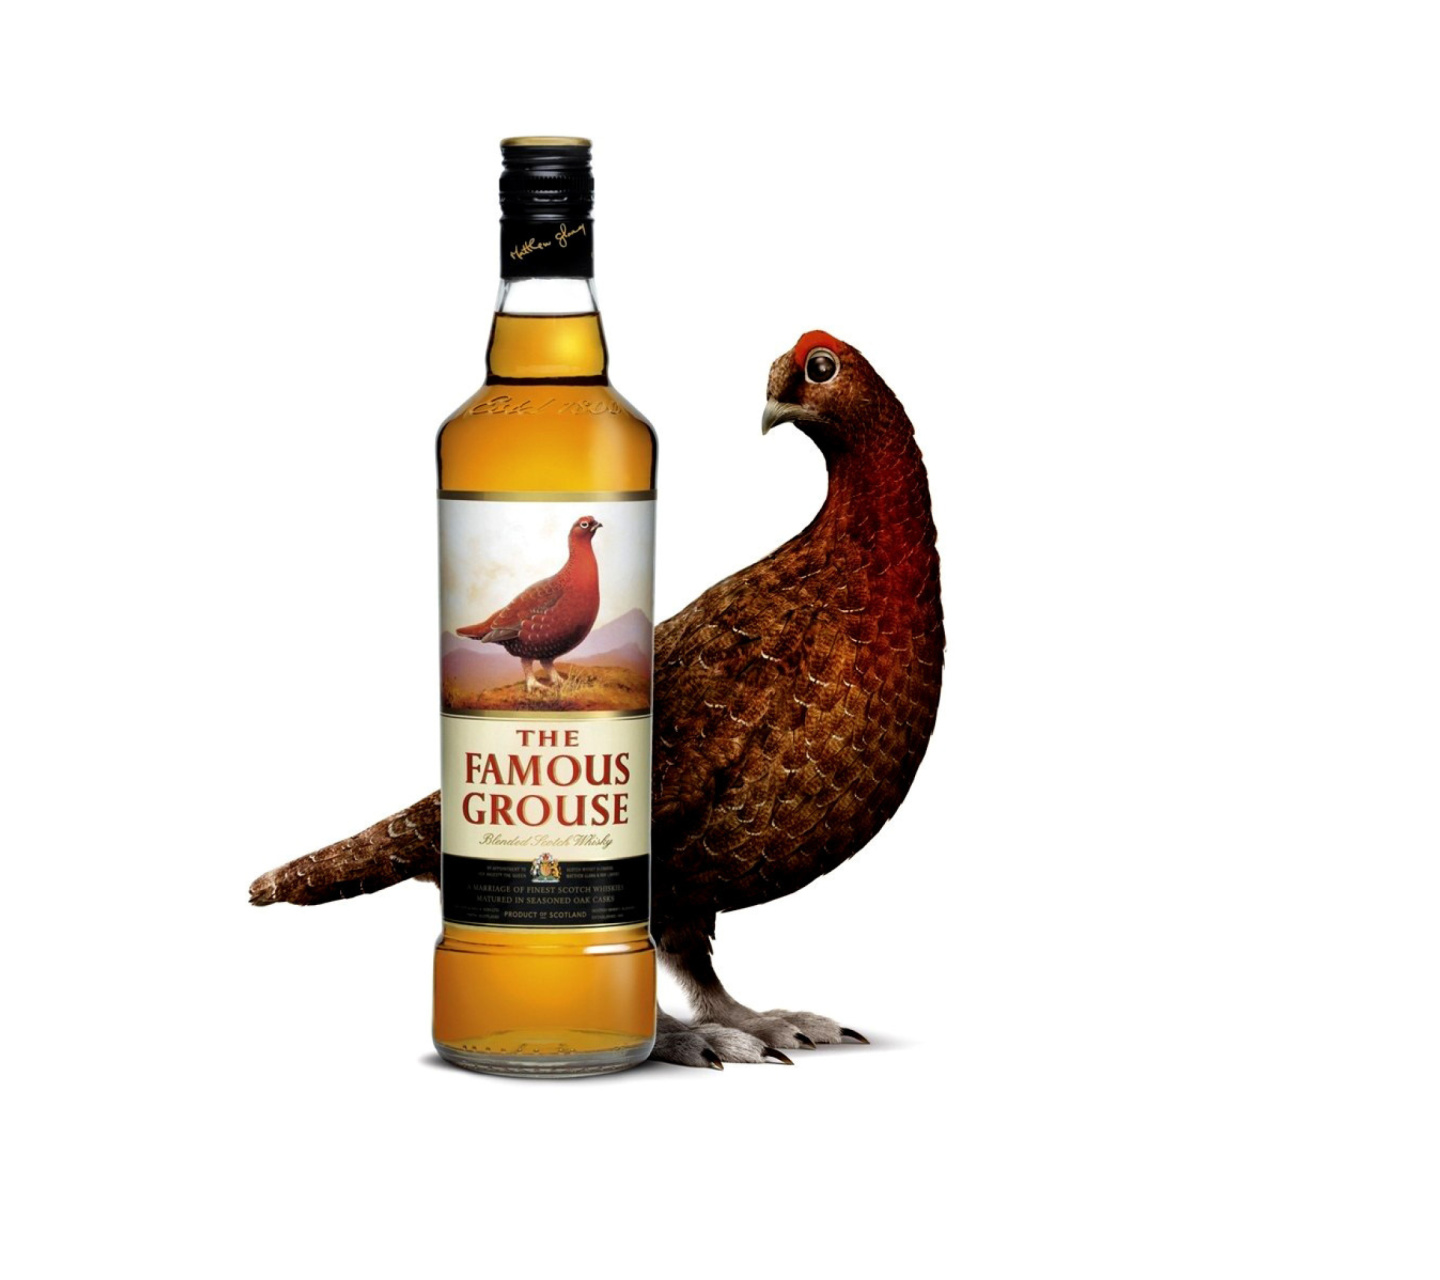 The Famous Grouse Scotch Whisky screenshot #1 1440x1280